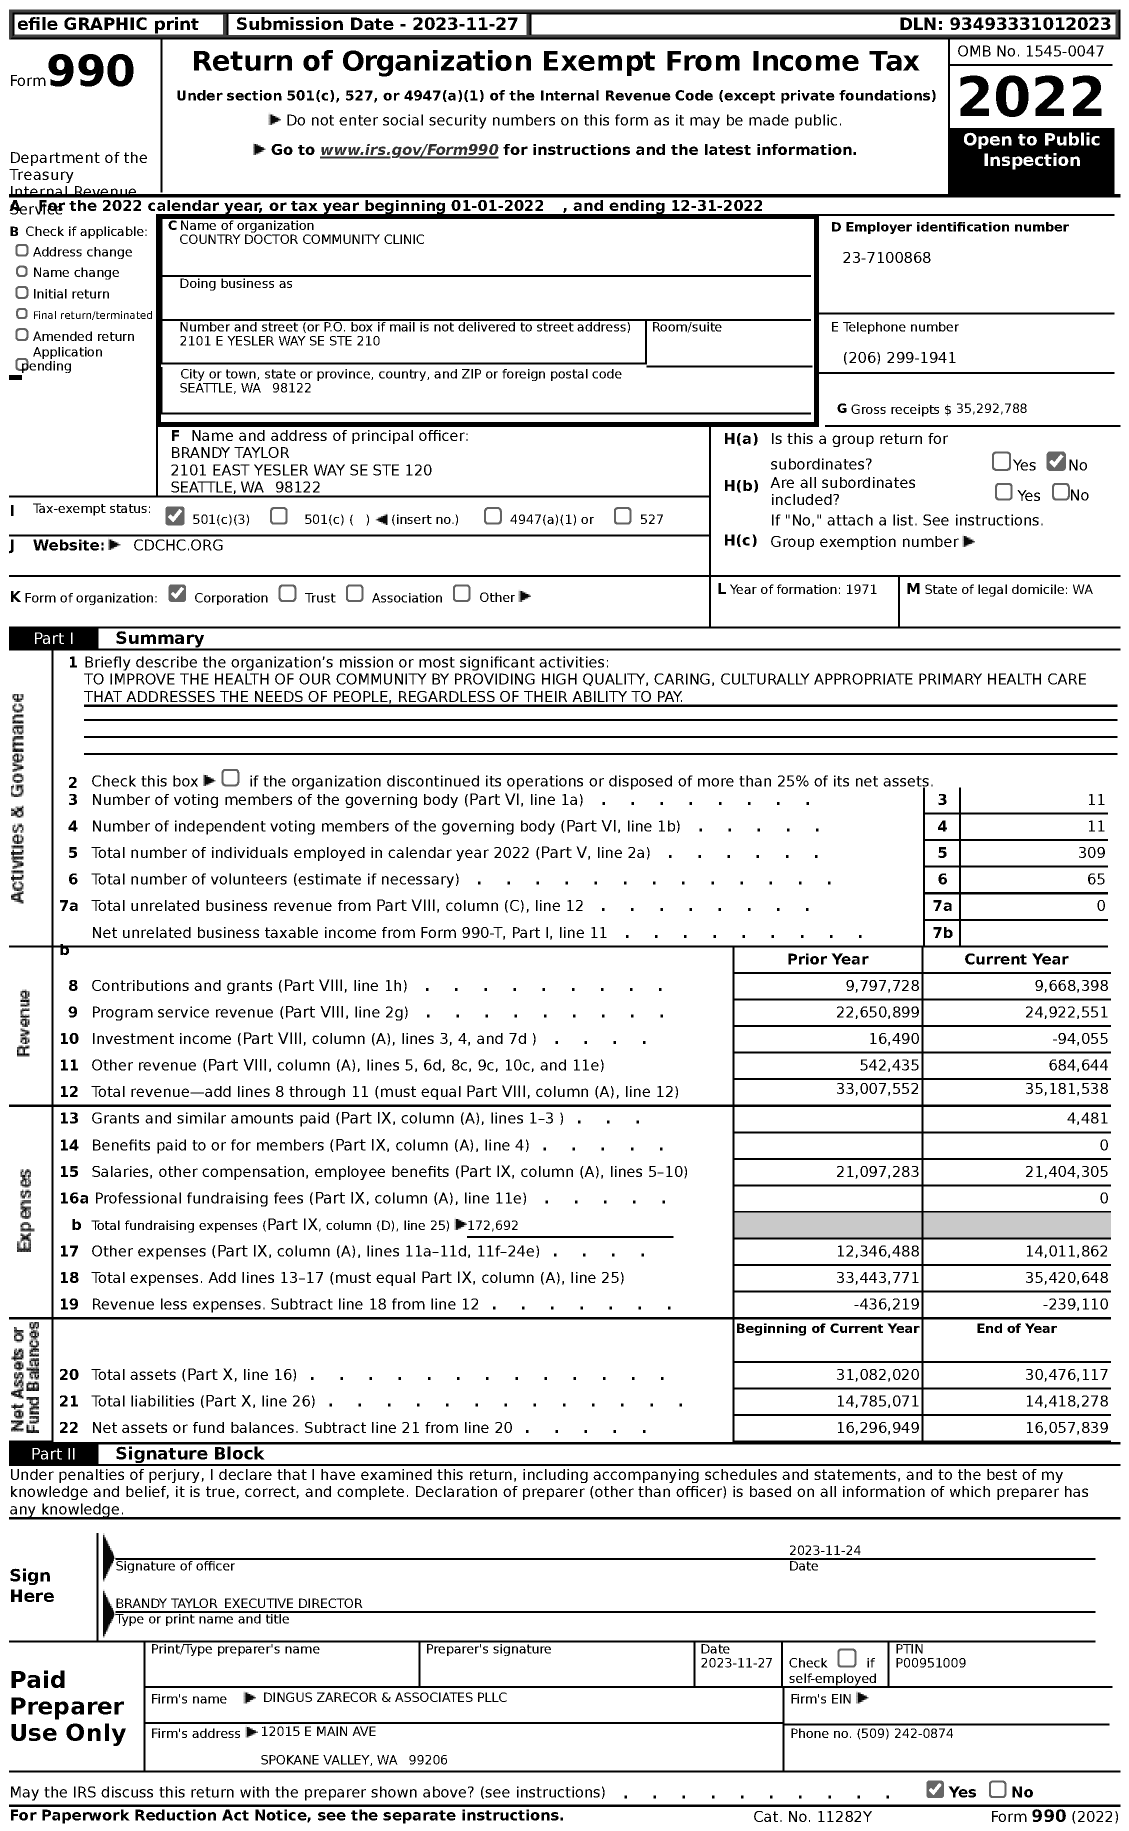 Image of first page of 2022 Form 990 for Country Doctor Community Clinic